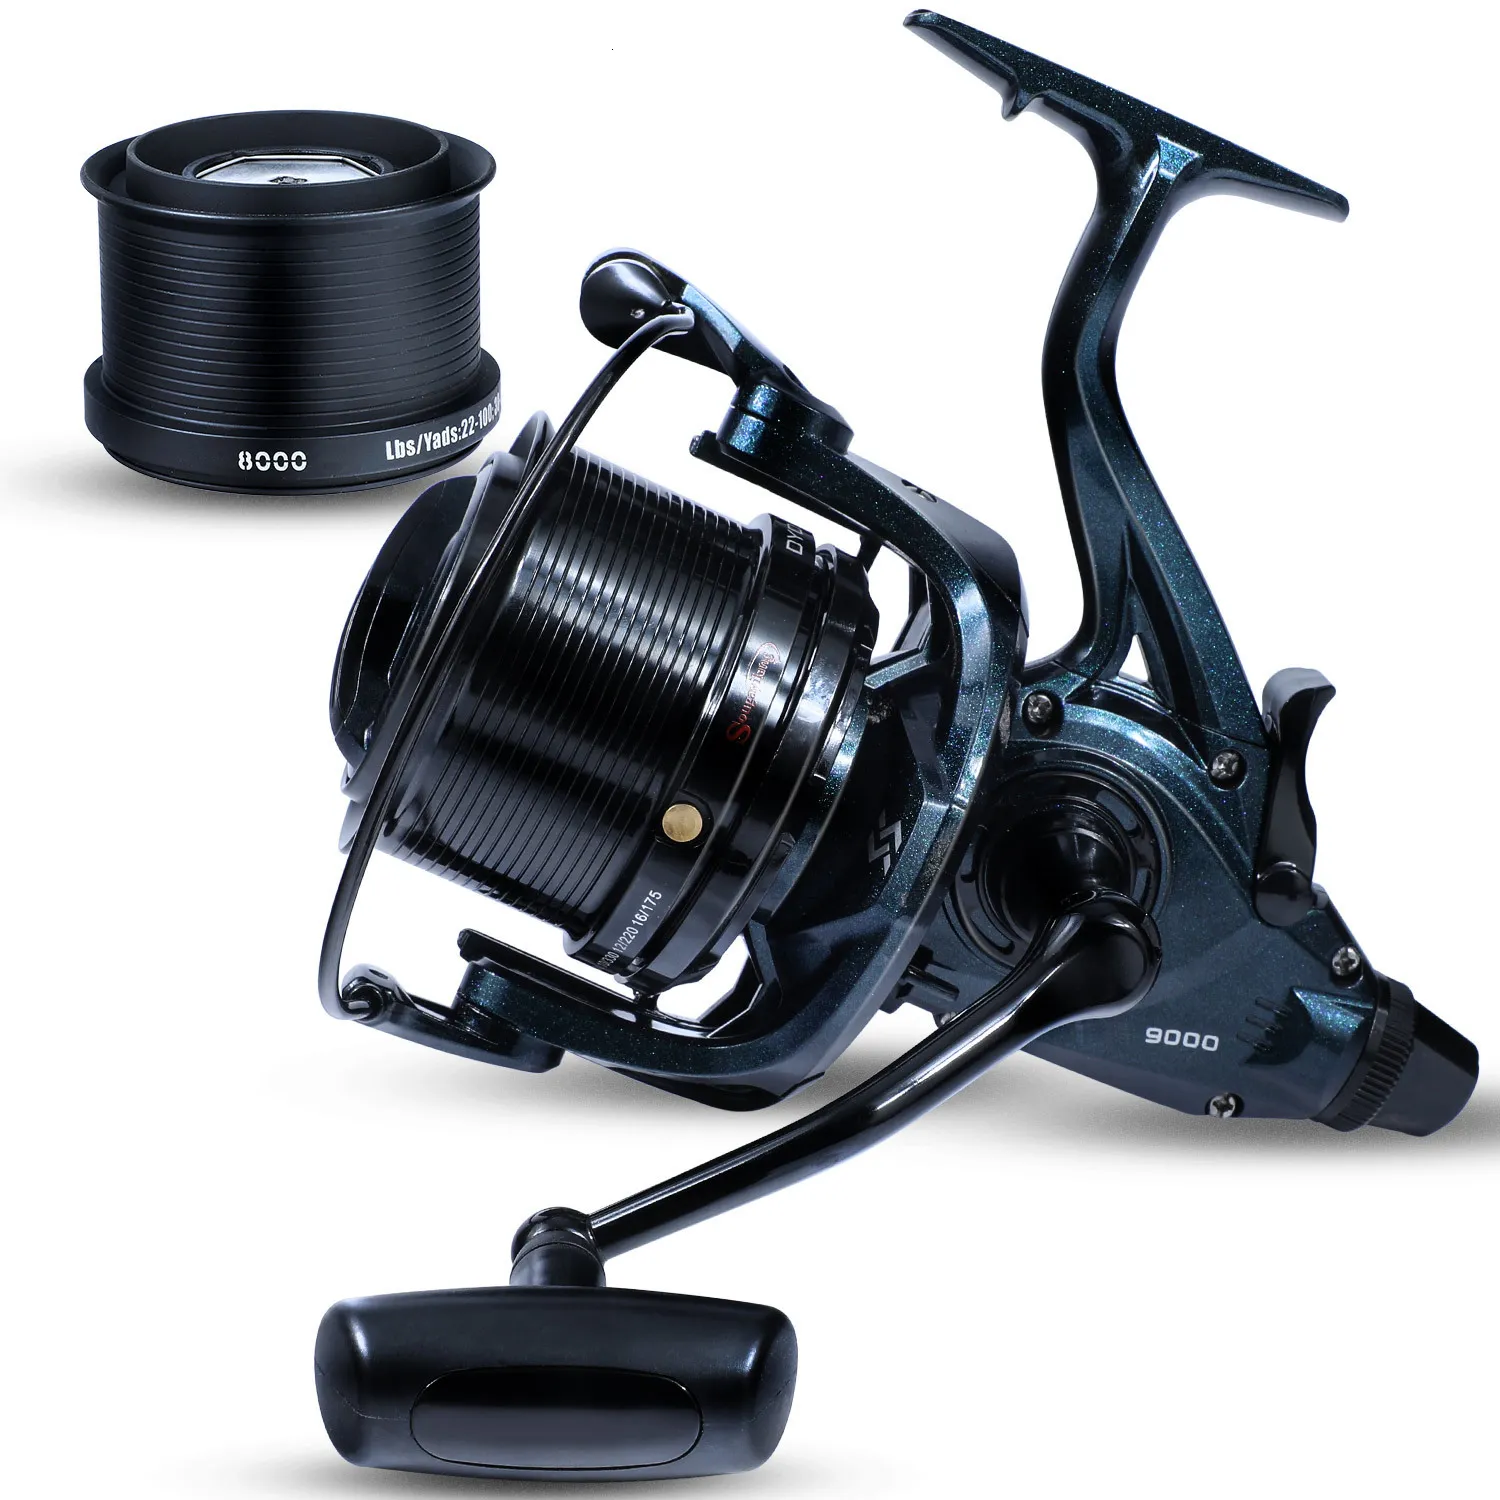 Sougayilang DYD900012000 Full Metal Best Spinning Reel Combo 131BB, 25KG  Max Drag Power For Saltwater Trolling And Surfing 230824 From Tie07, $41.83